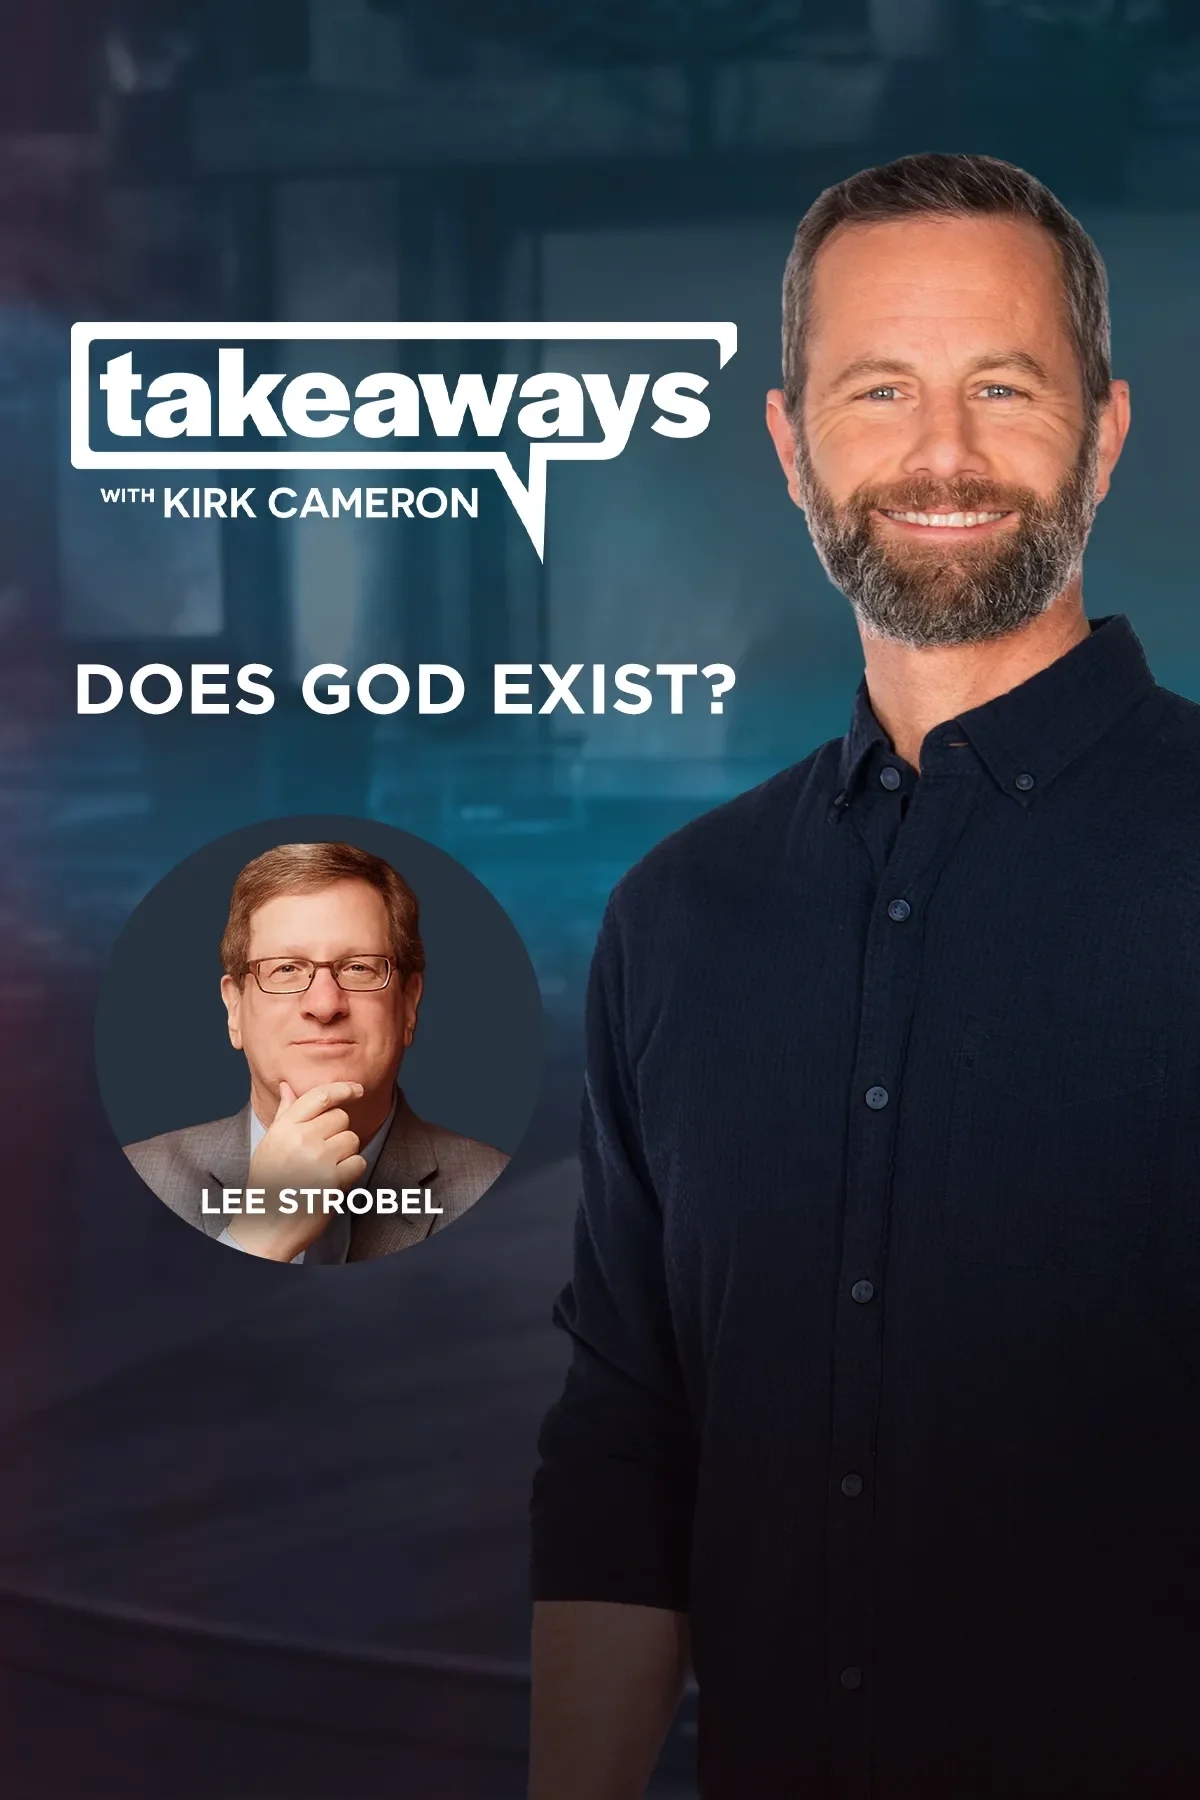 Takeaways with Kirk Cameron - Does God Exist? on TBN+